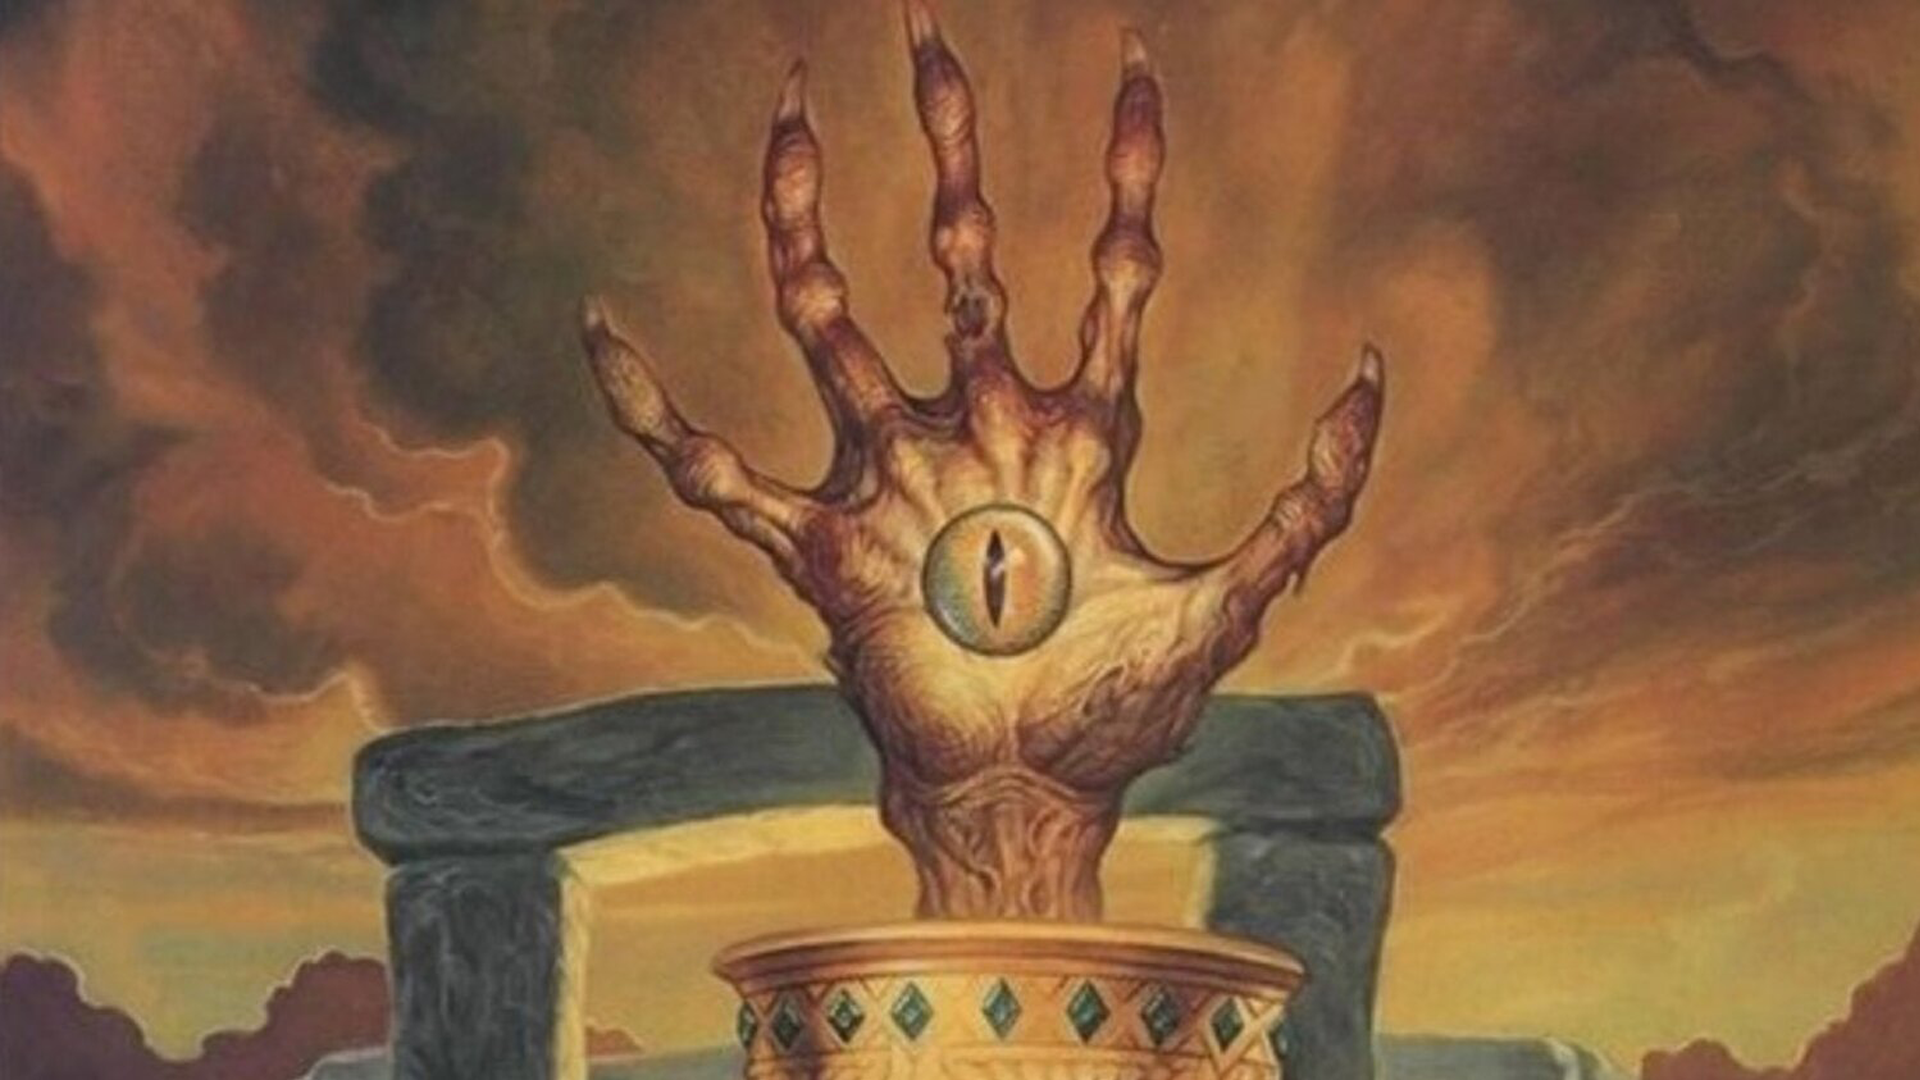 Dungeons & Dragons film features the eye and the hand of Vecna.